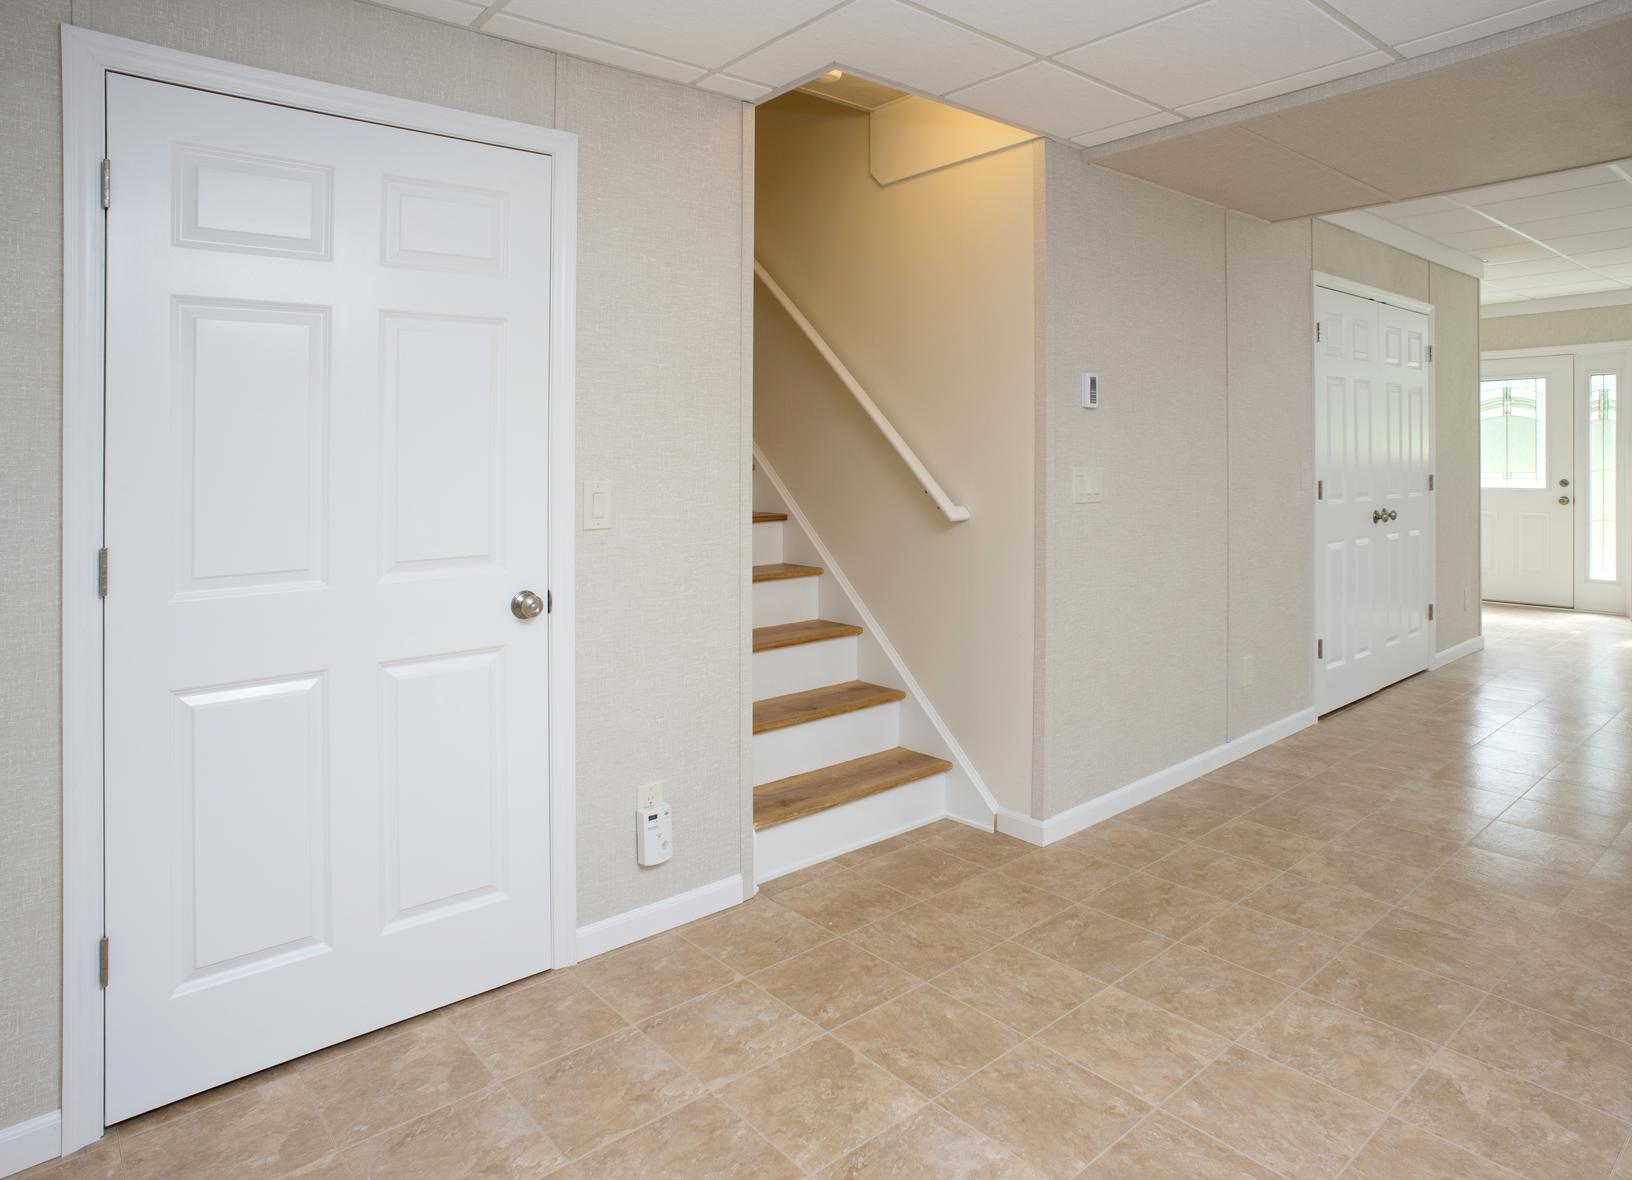 Basement Flooring in a home in Brentwood, Long Island